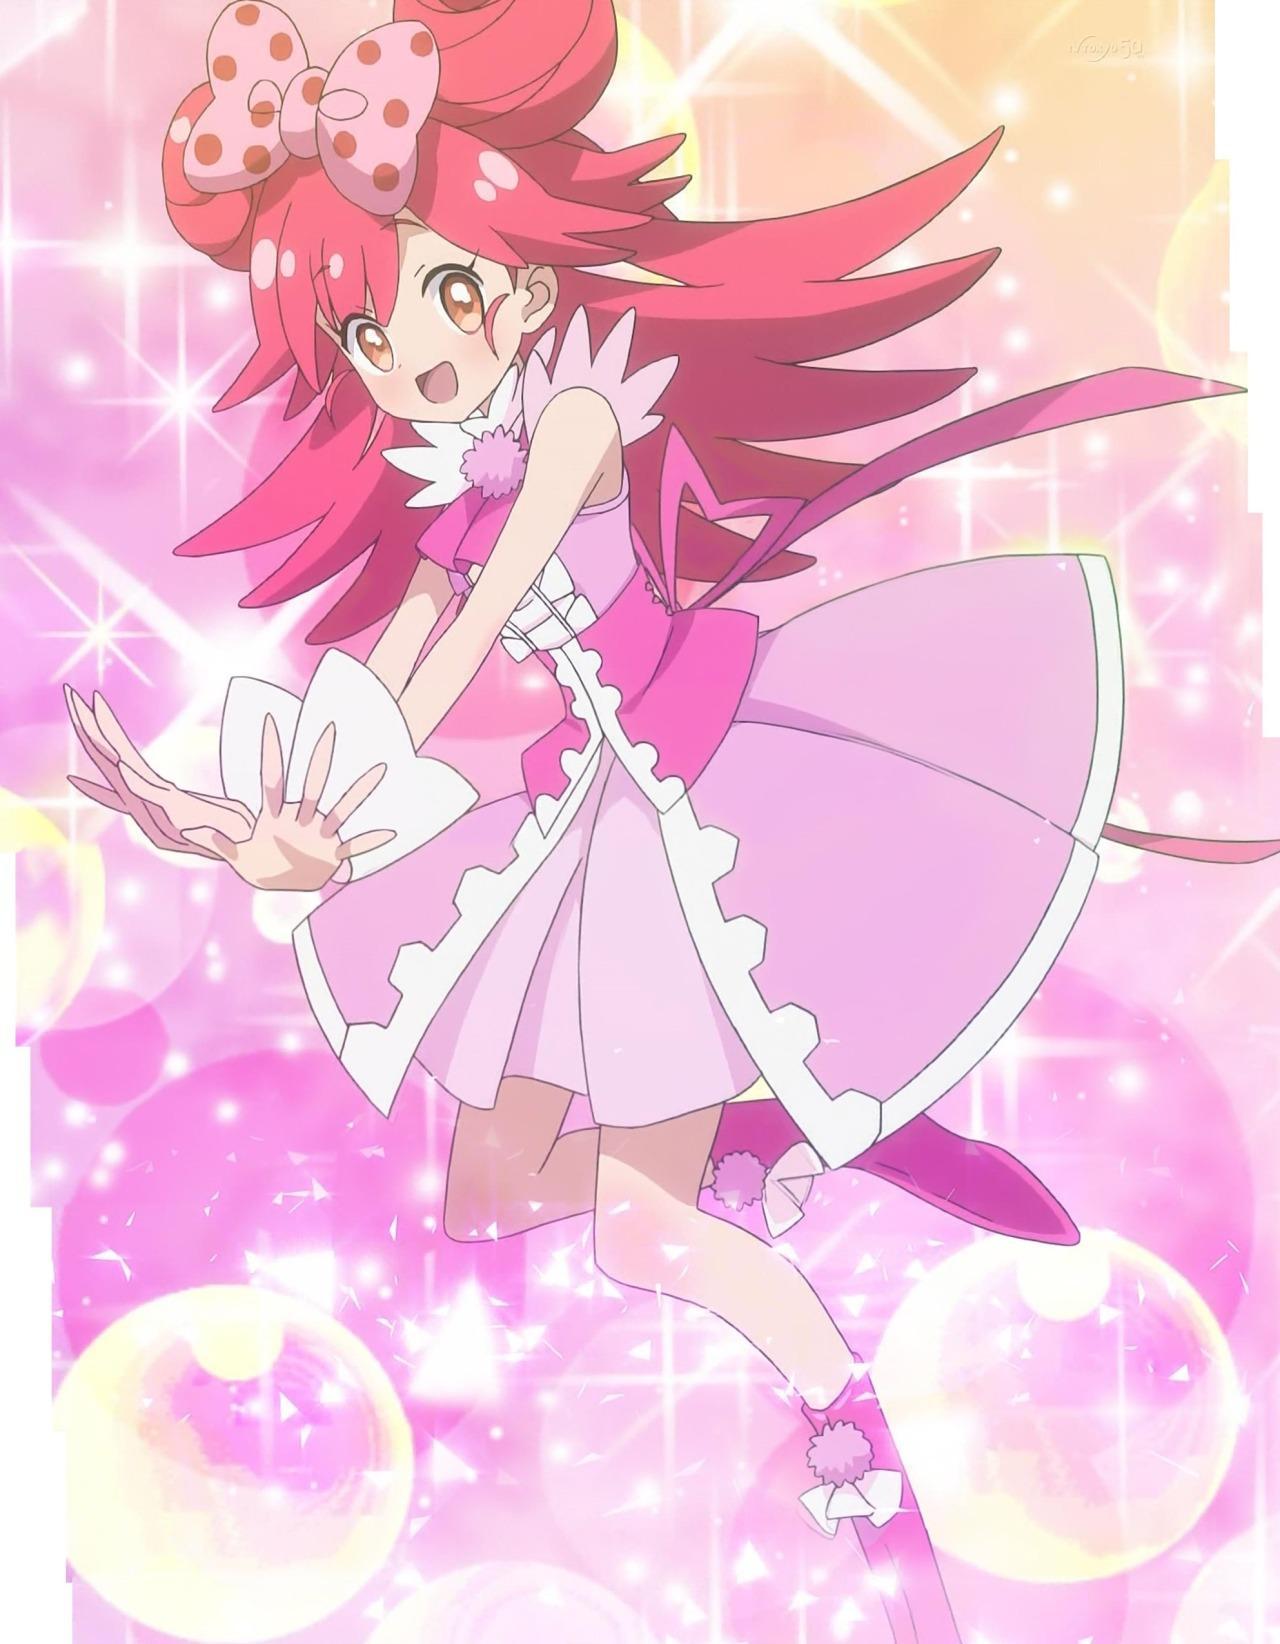 Jewelpet Lady Wallpaper For Android Apk Download